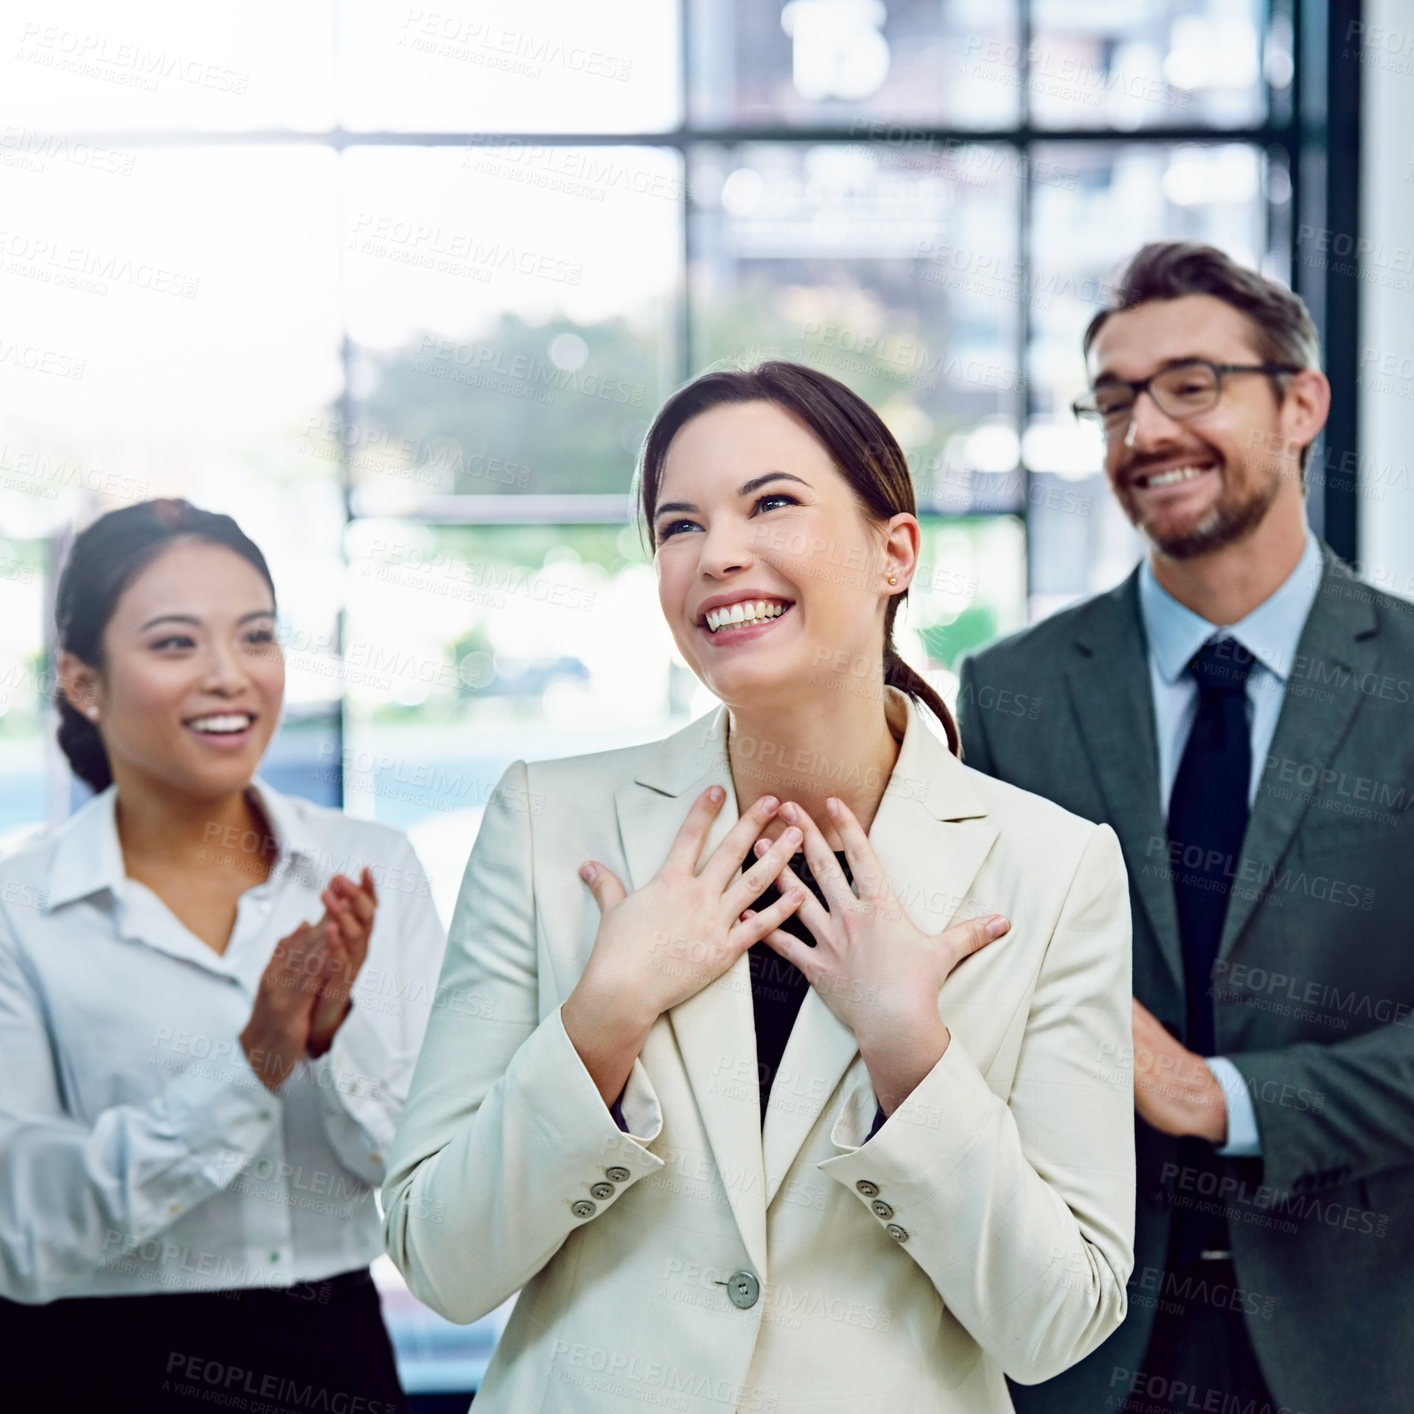 Buy stock photo Applause, gratitude and business woman with team in office for good news, achievement or goal. Happy, pride and group of financial advisors clapping hands for confident female person in workplace.